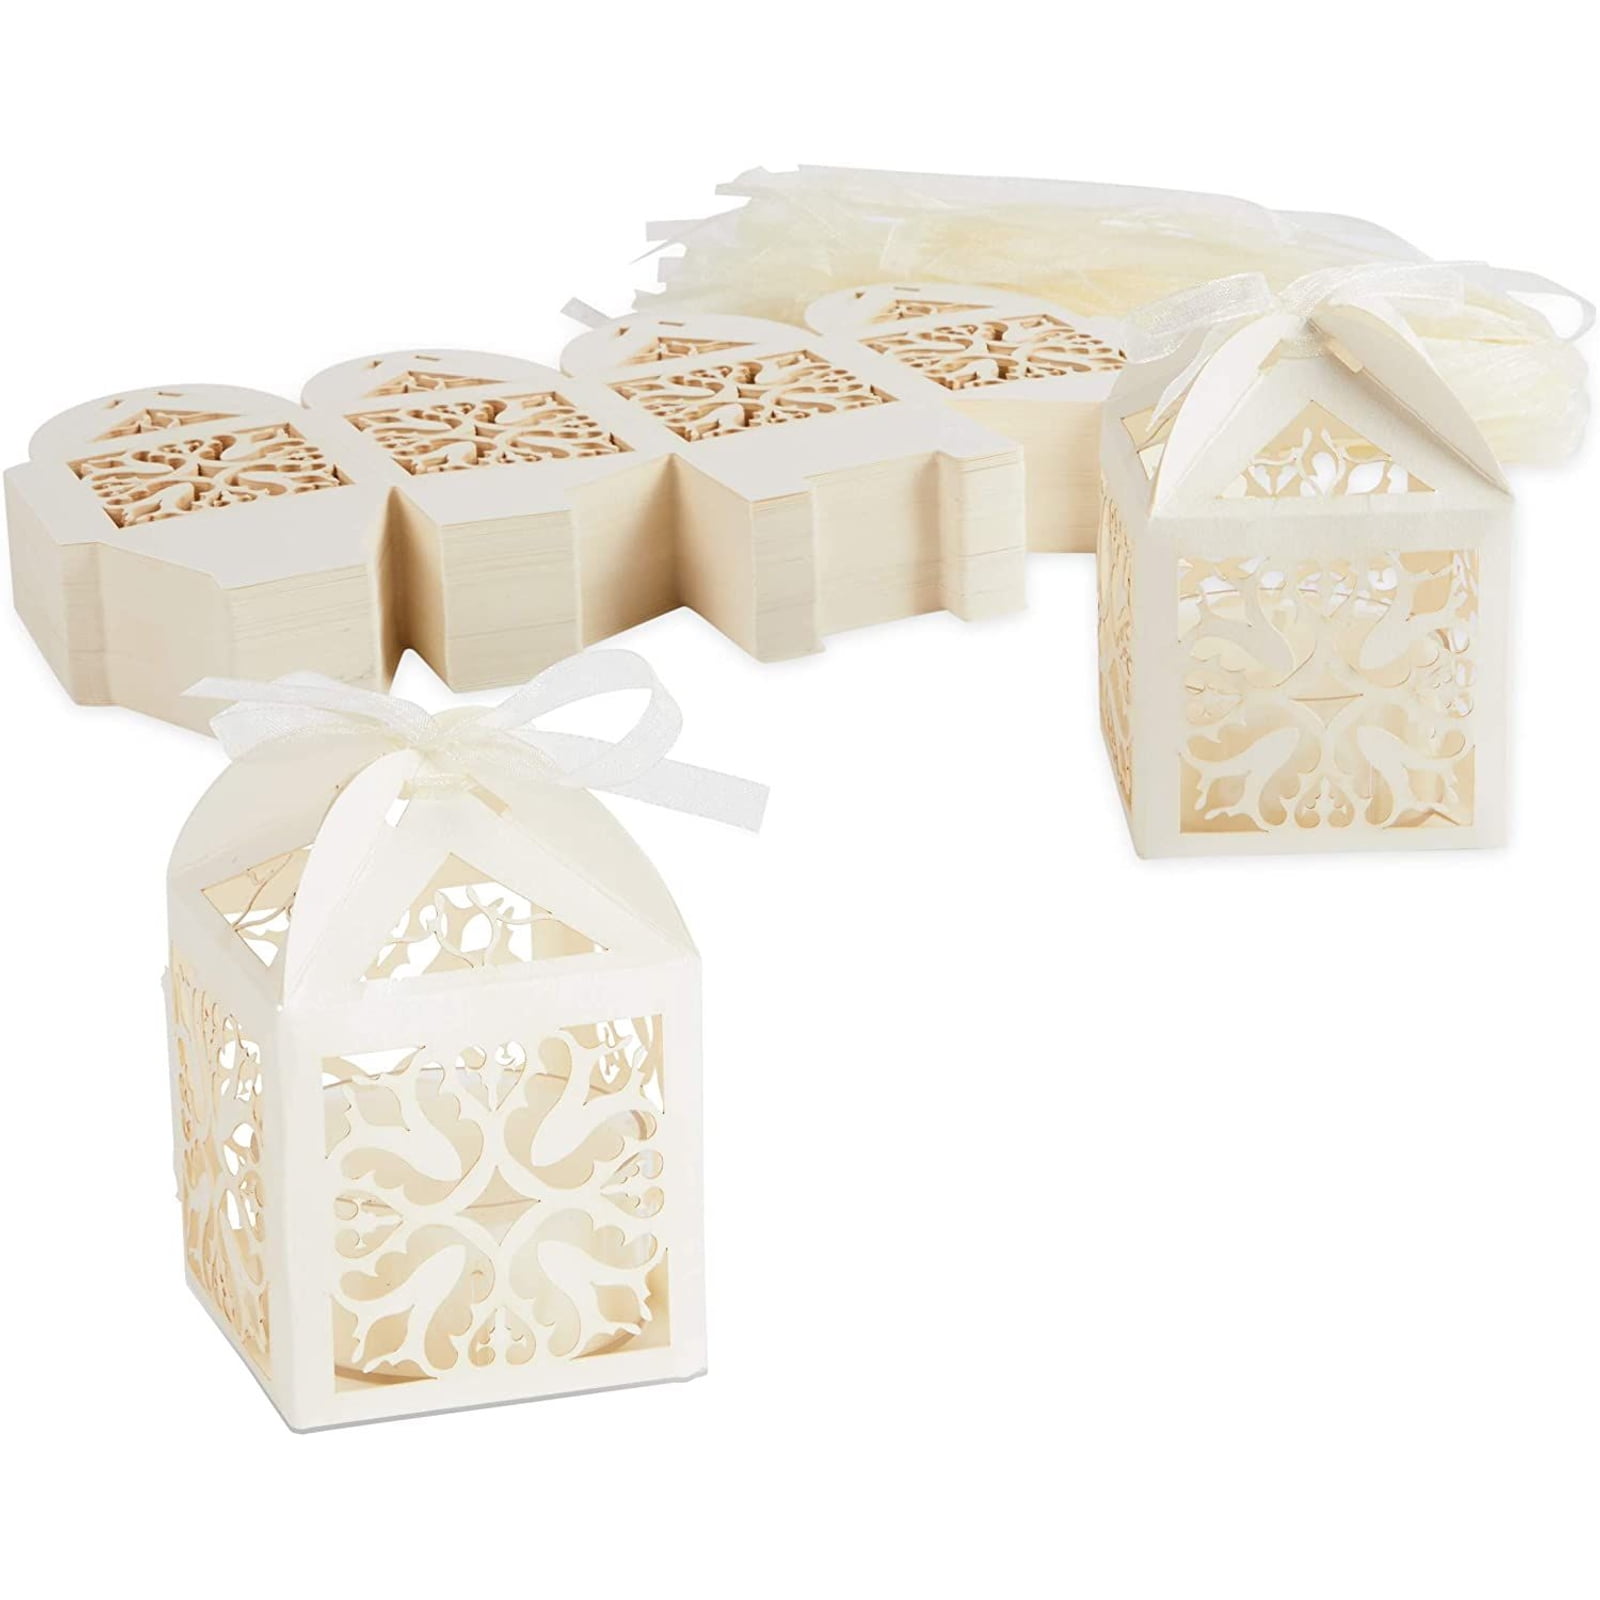 Wedding Favours Favors Luxury Gold and White Pre Filled Polka Dot Treat Boxes 